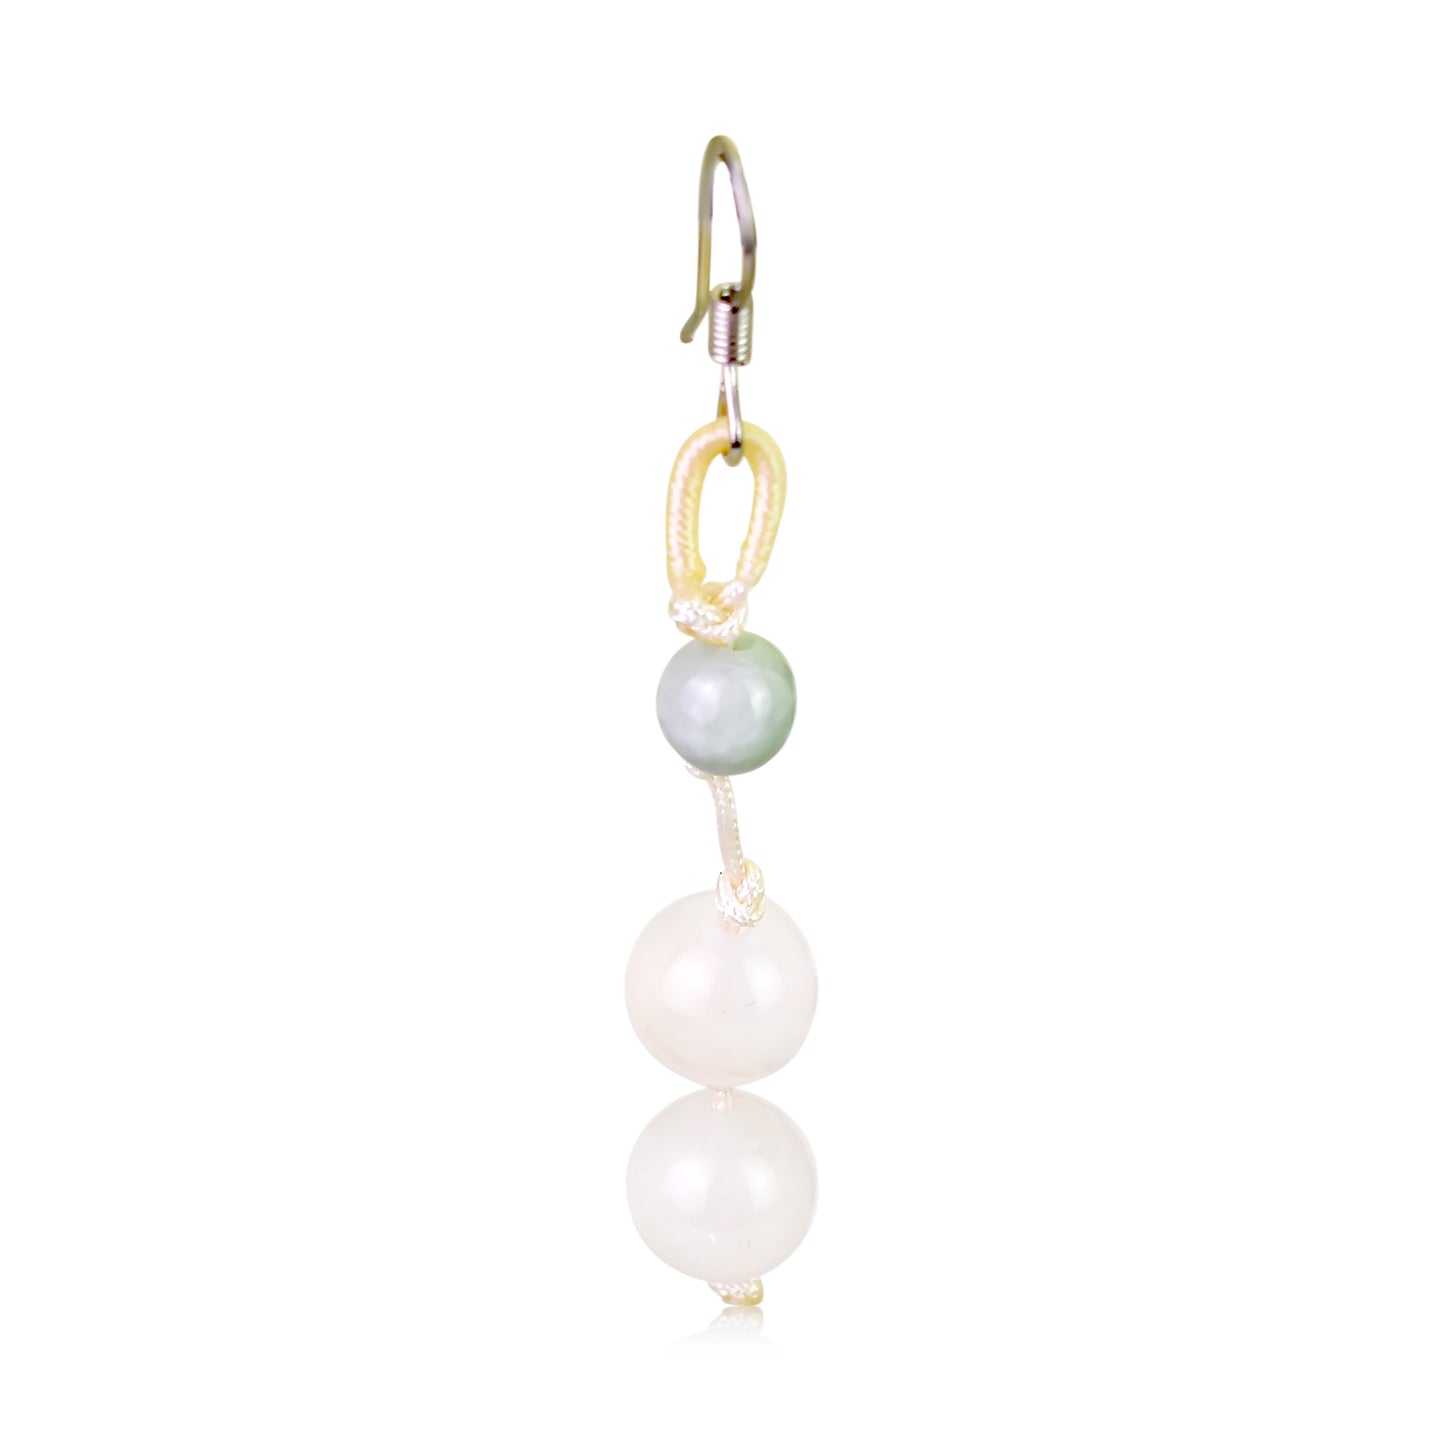 Make a Statement with Alluring Beads Gemstone Earrings made with White Cord